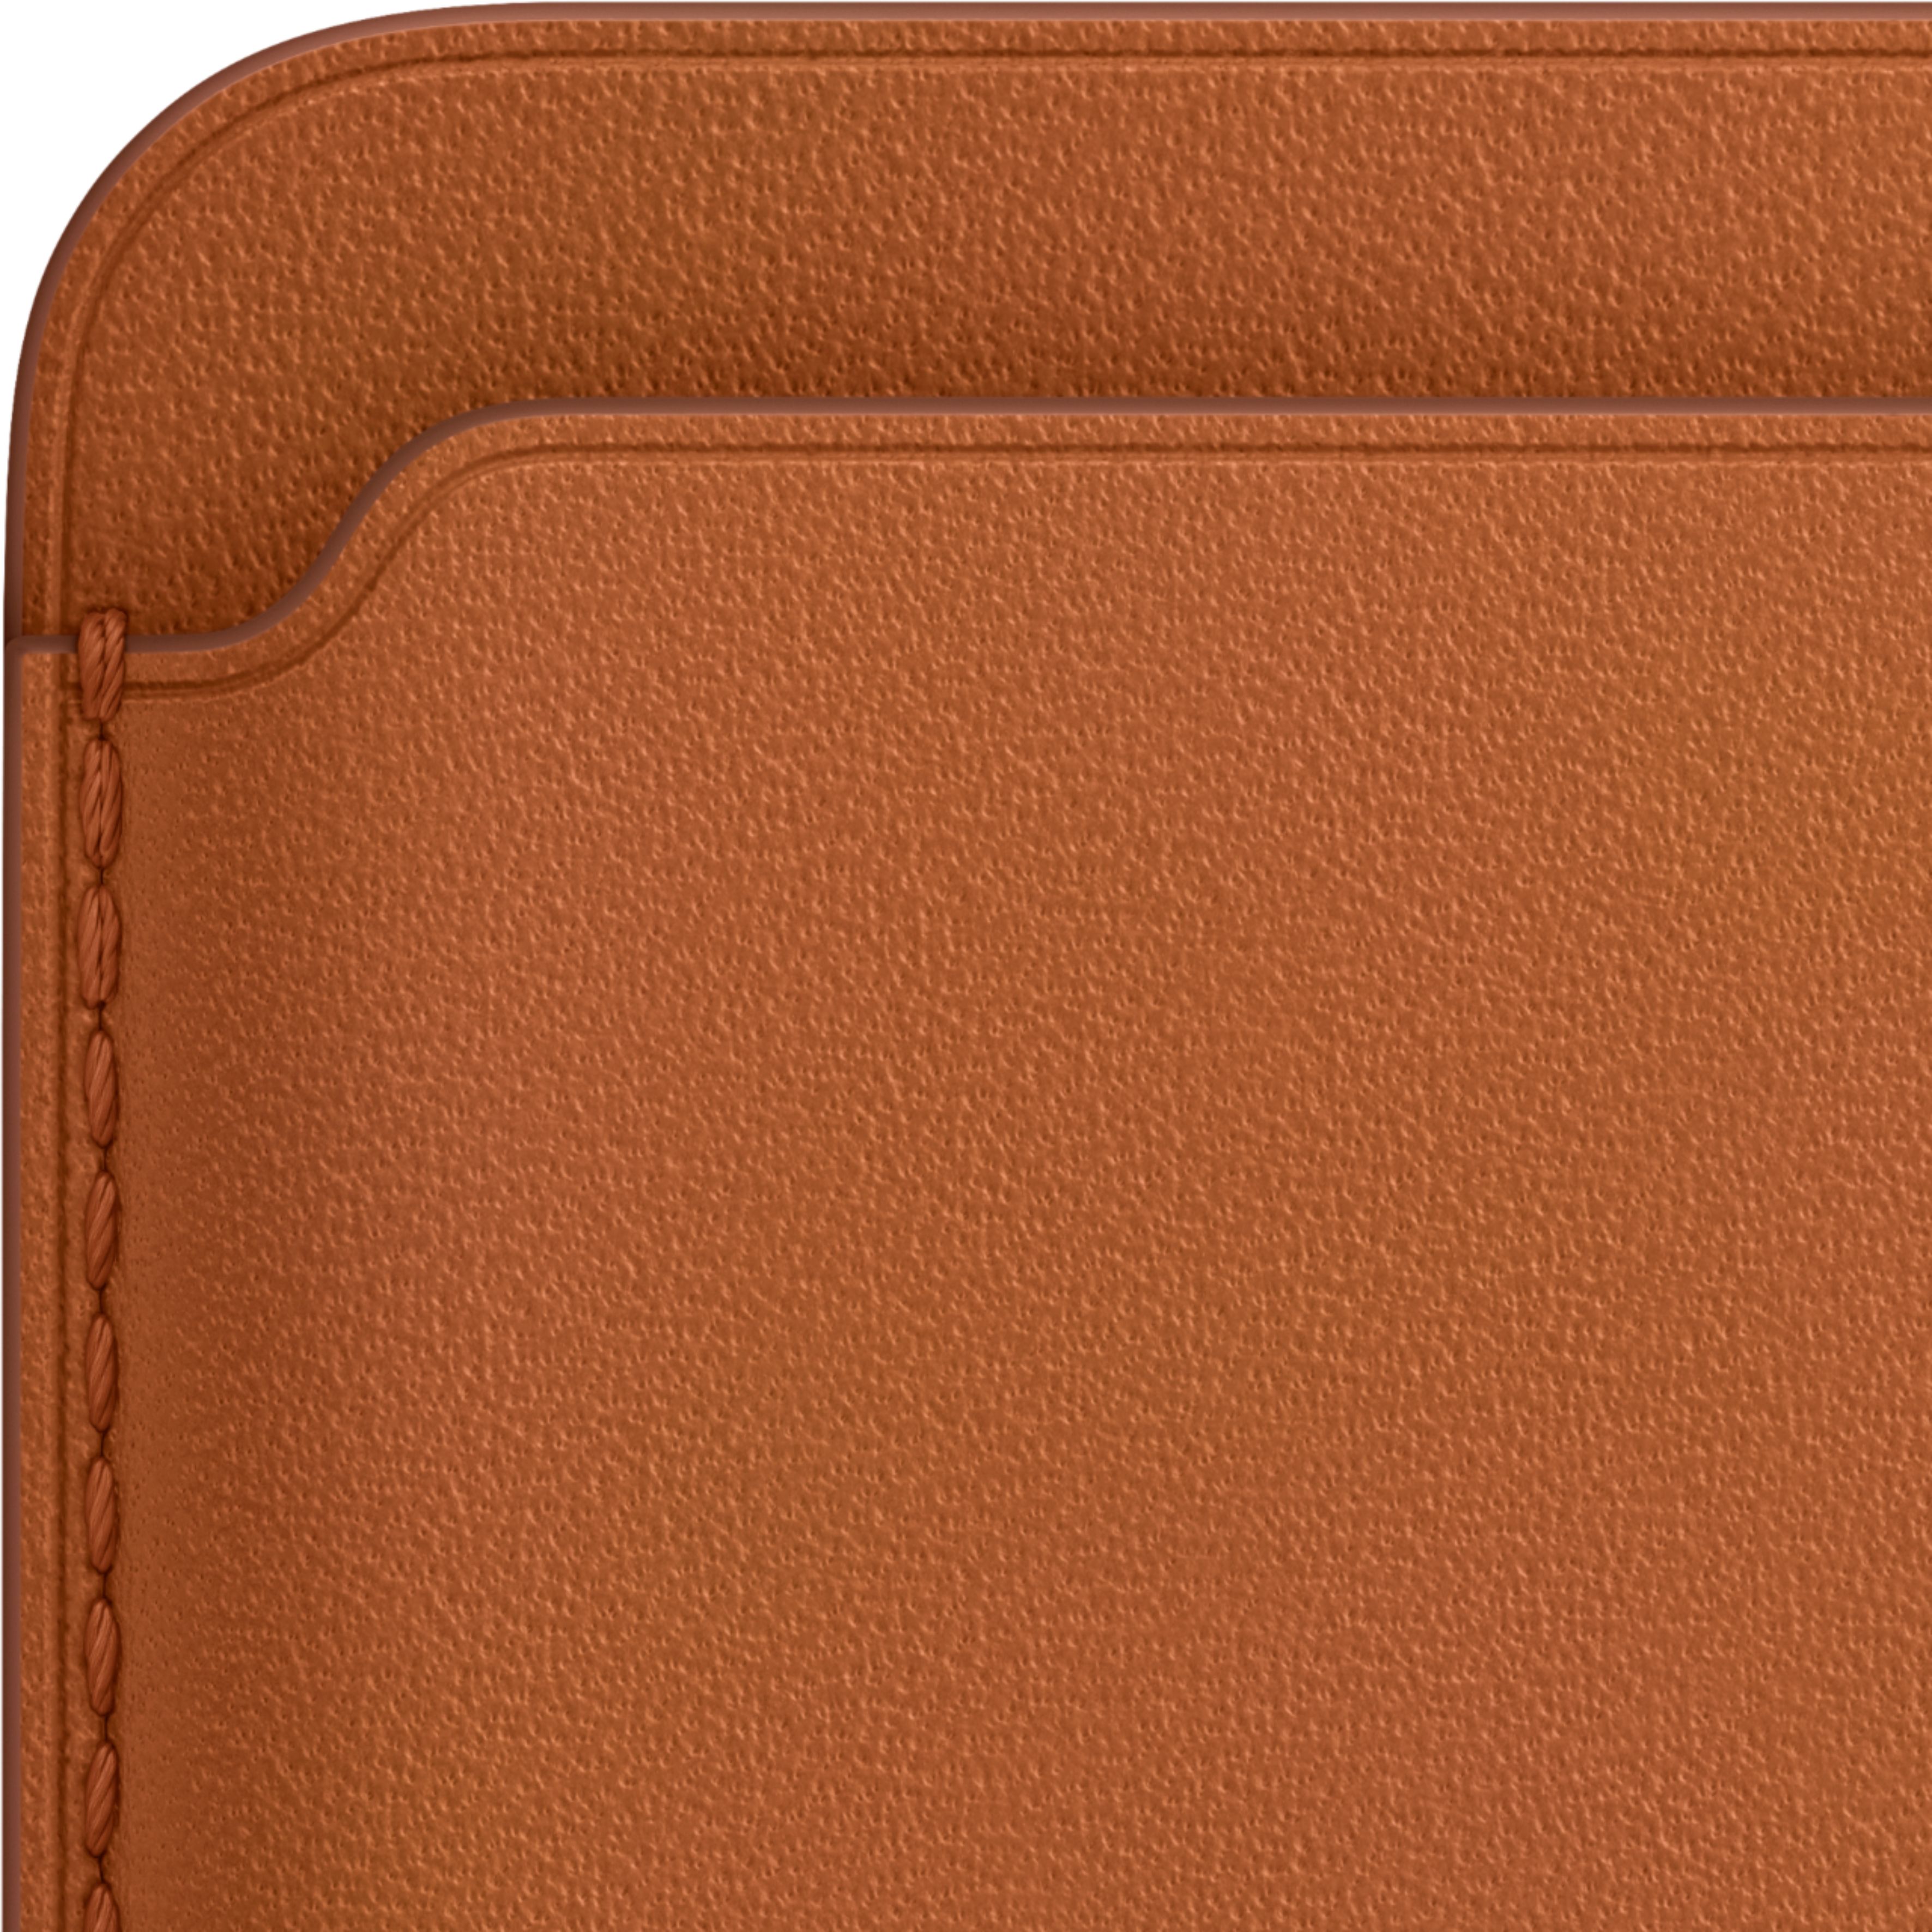 Apple - iPhone® Leather Wallet with MagSafe - Saddle Brown $25